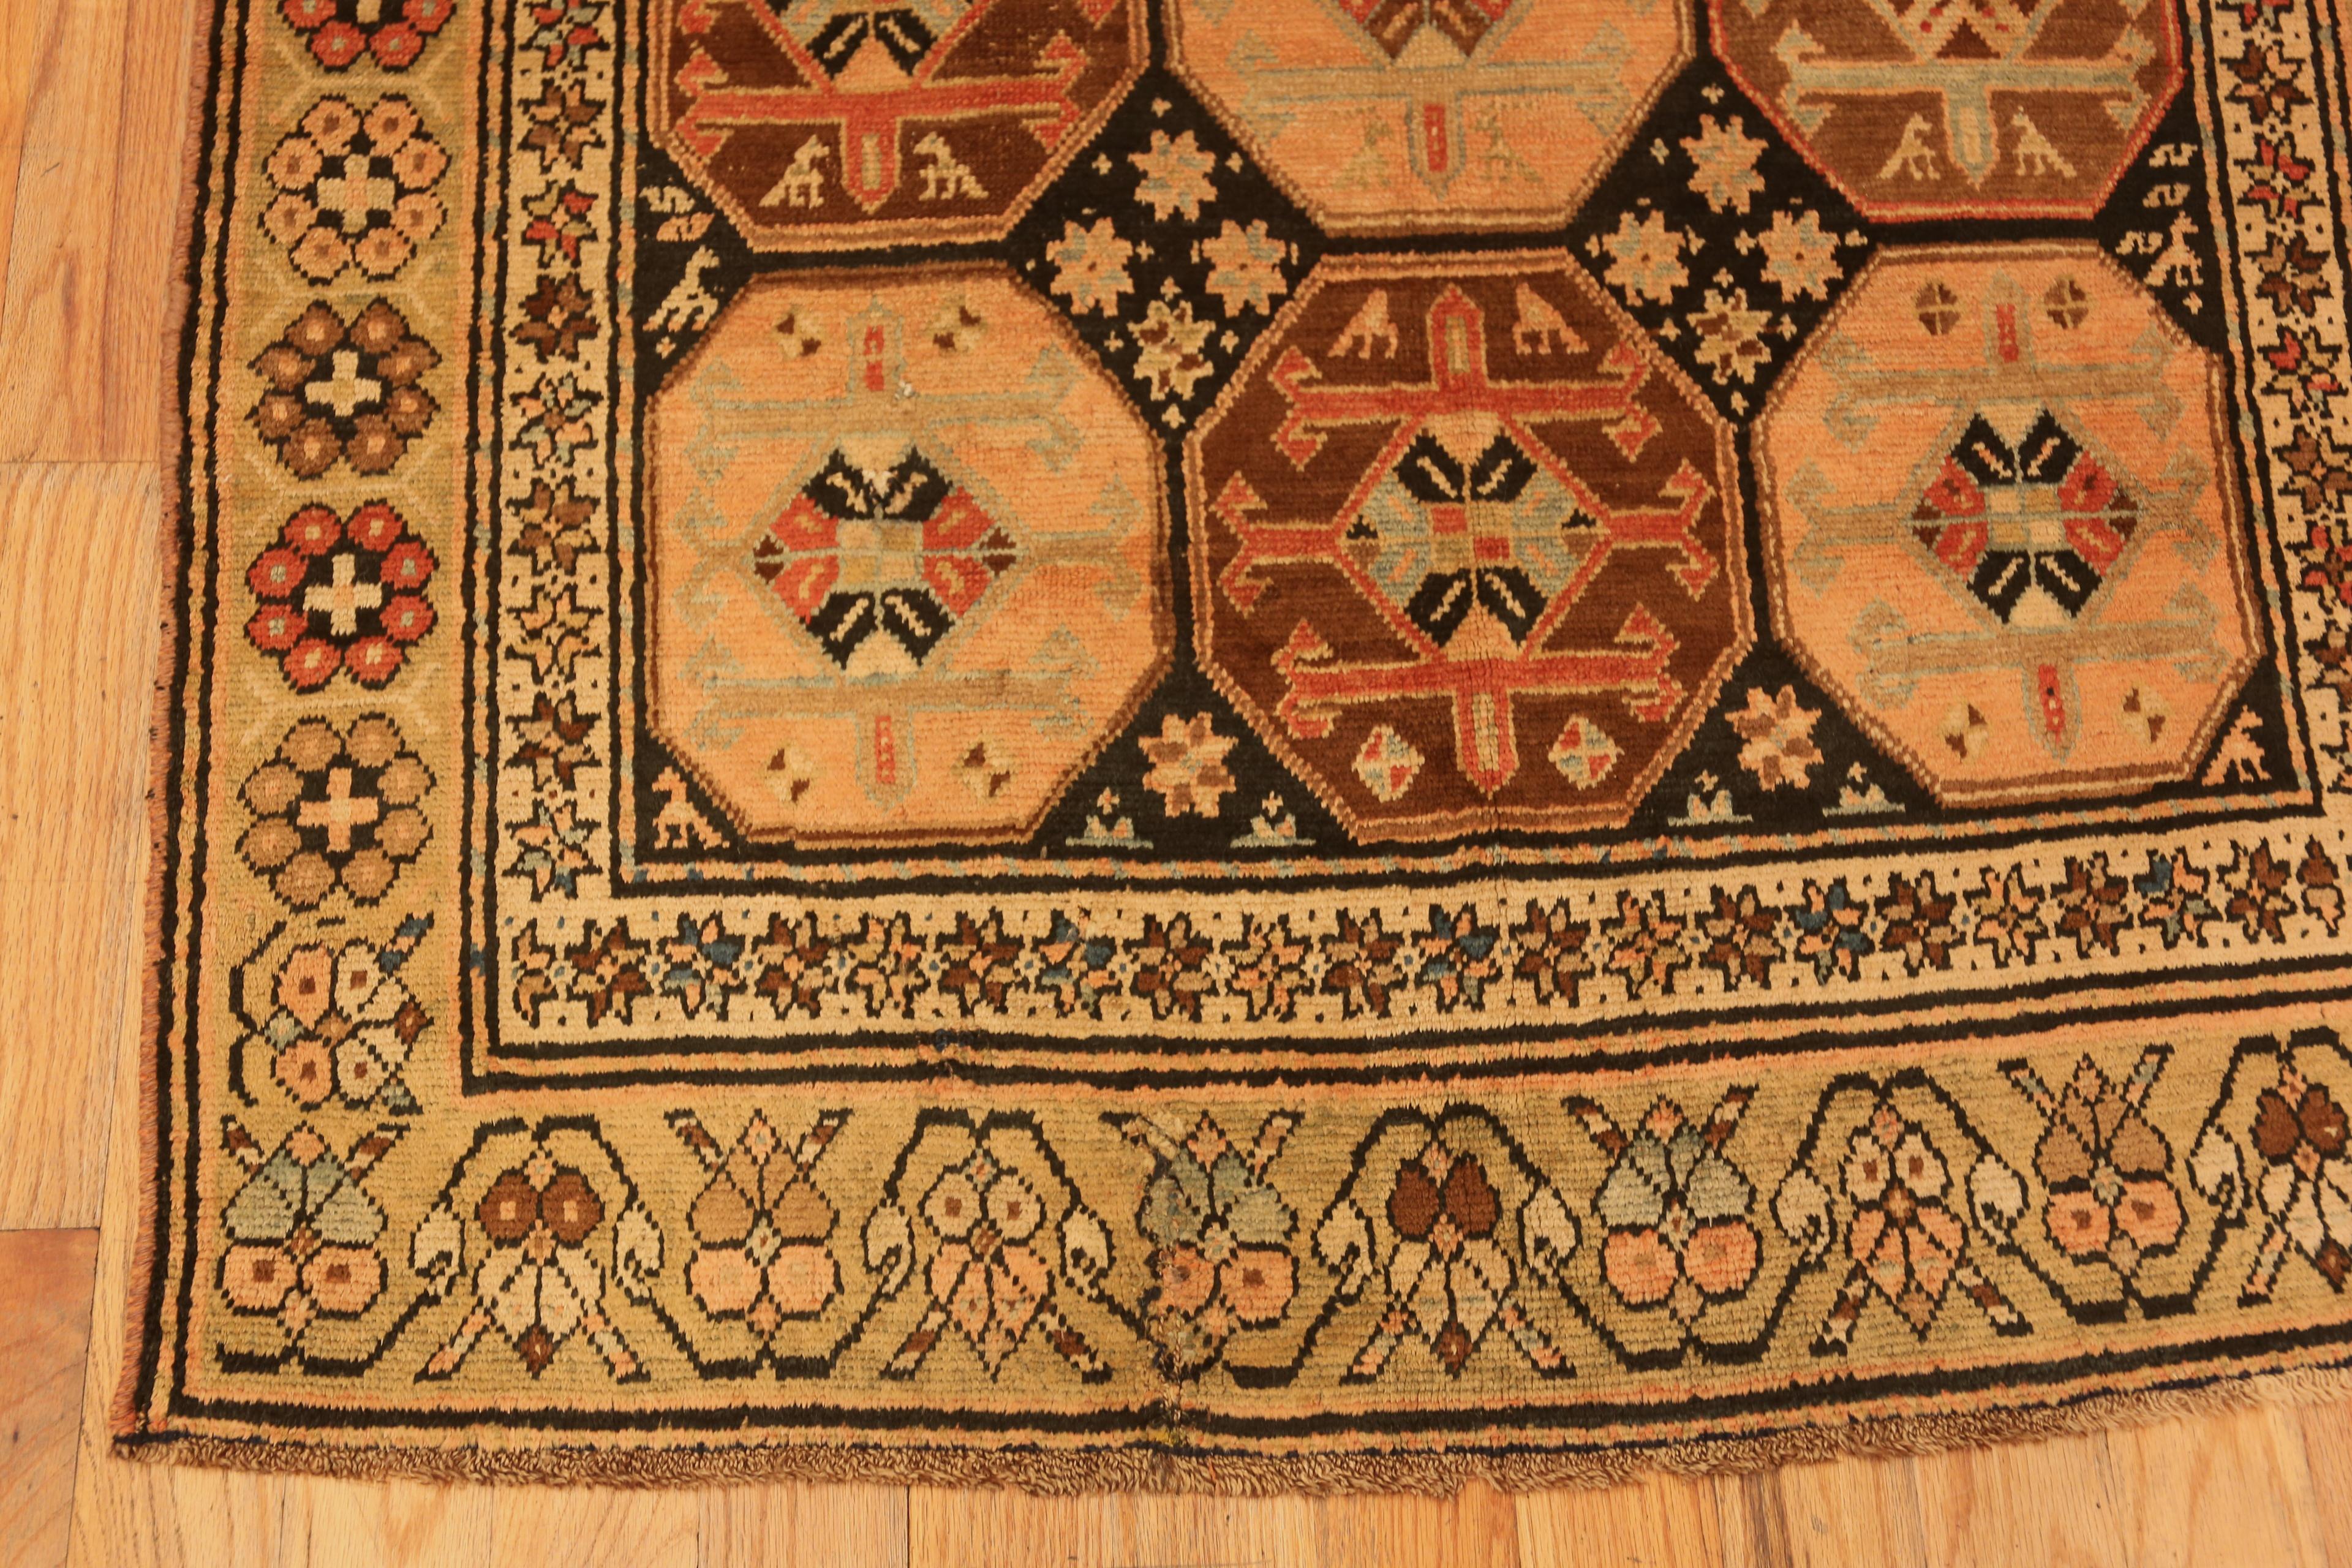 Hand-Woven Nazmiyal Collection Antique Caucasian Karabagh Runner. 4 ft 1 in x 11 ft 7 in